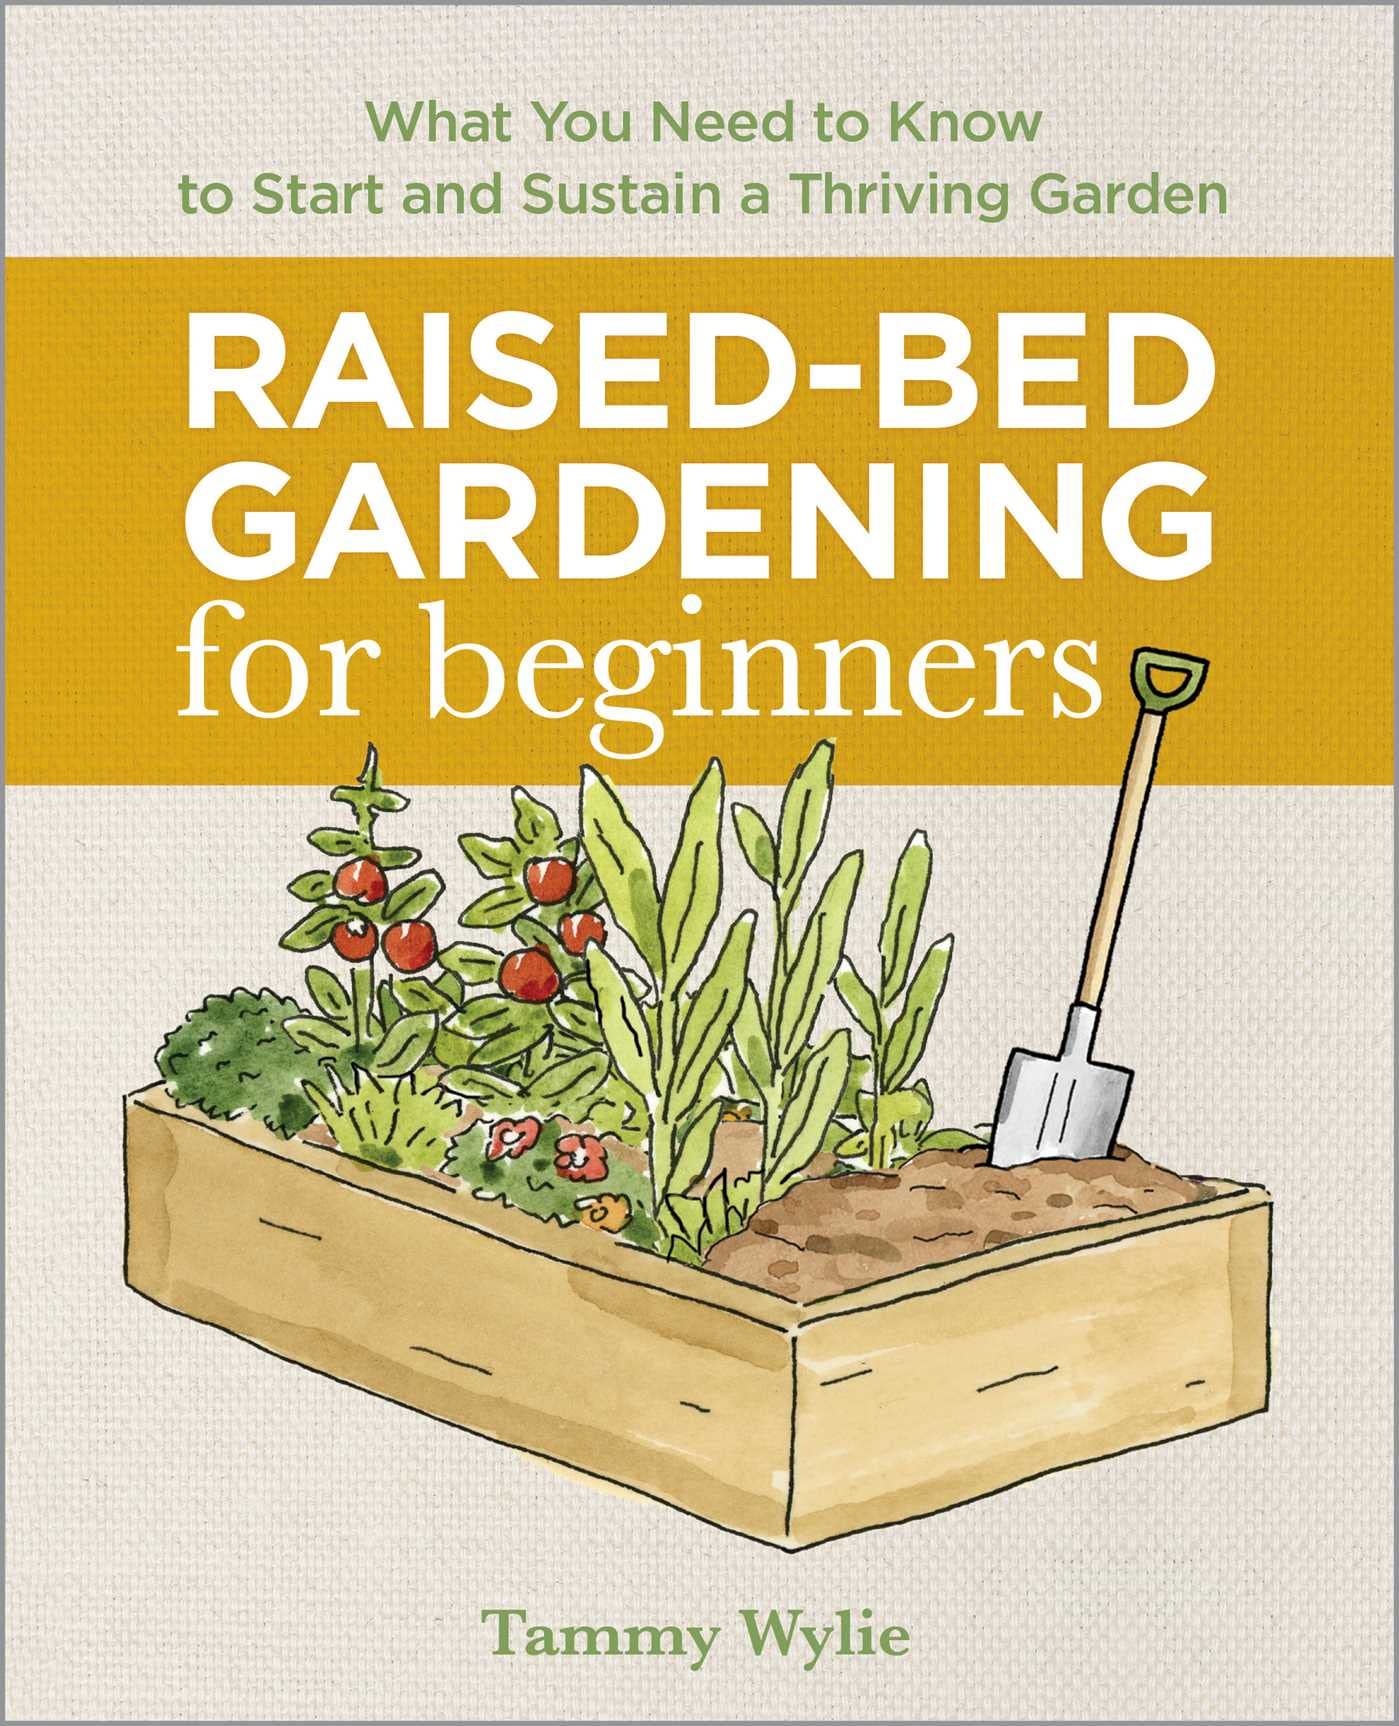 Raised-Bed Gardening for Beginners book